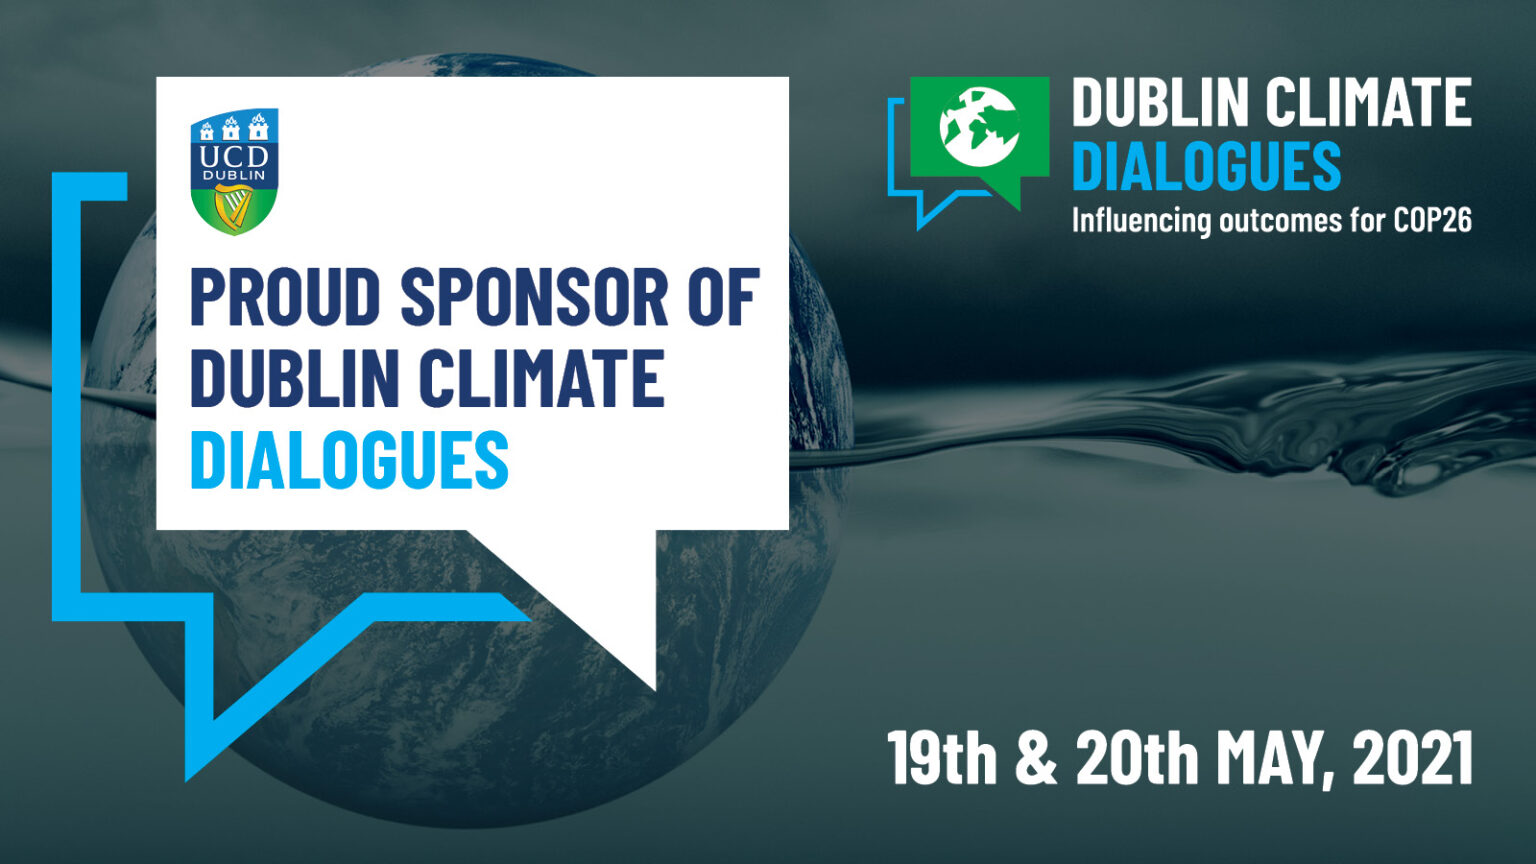 an image saying that ucd is a proud sponsor of the Dublin climate dialogues